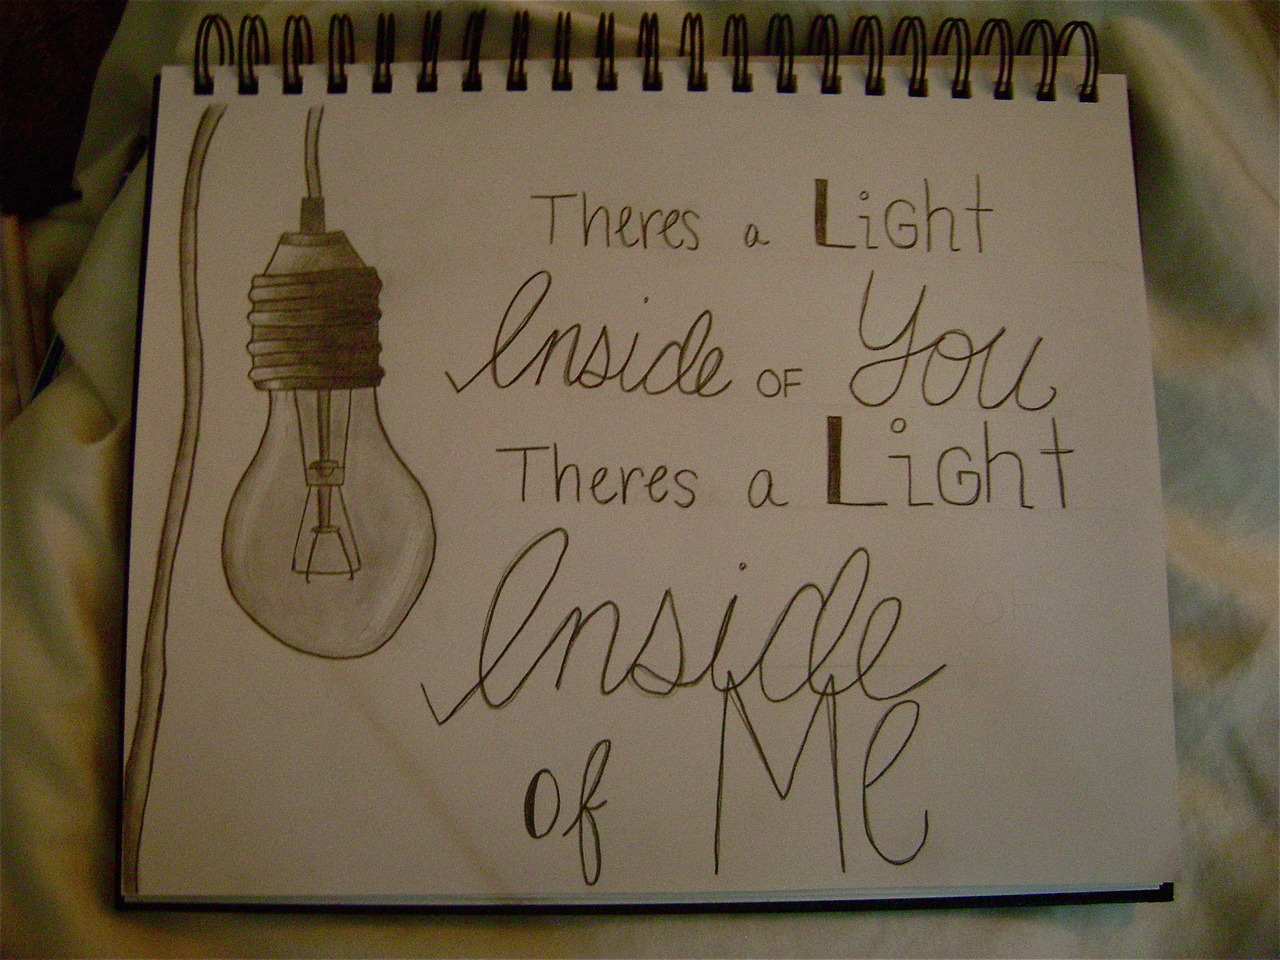 theres a light inside of you, theres a light inside of me. if you like it follow me at allieee.tumblr.com!